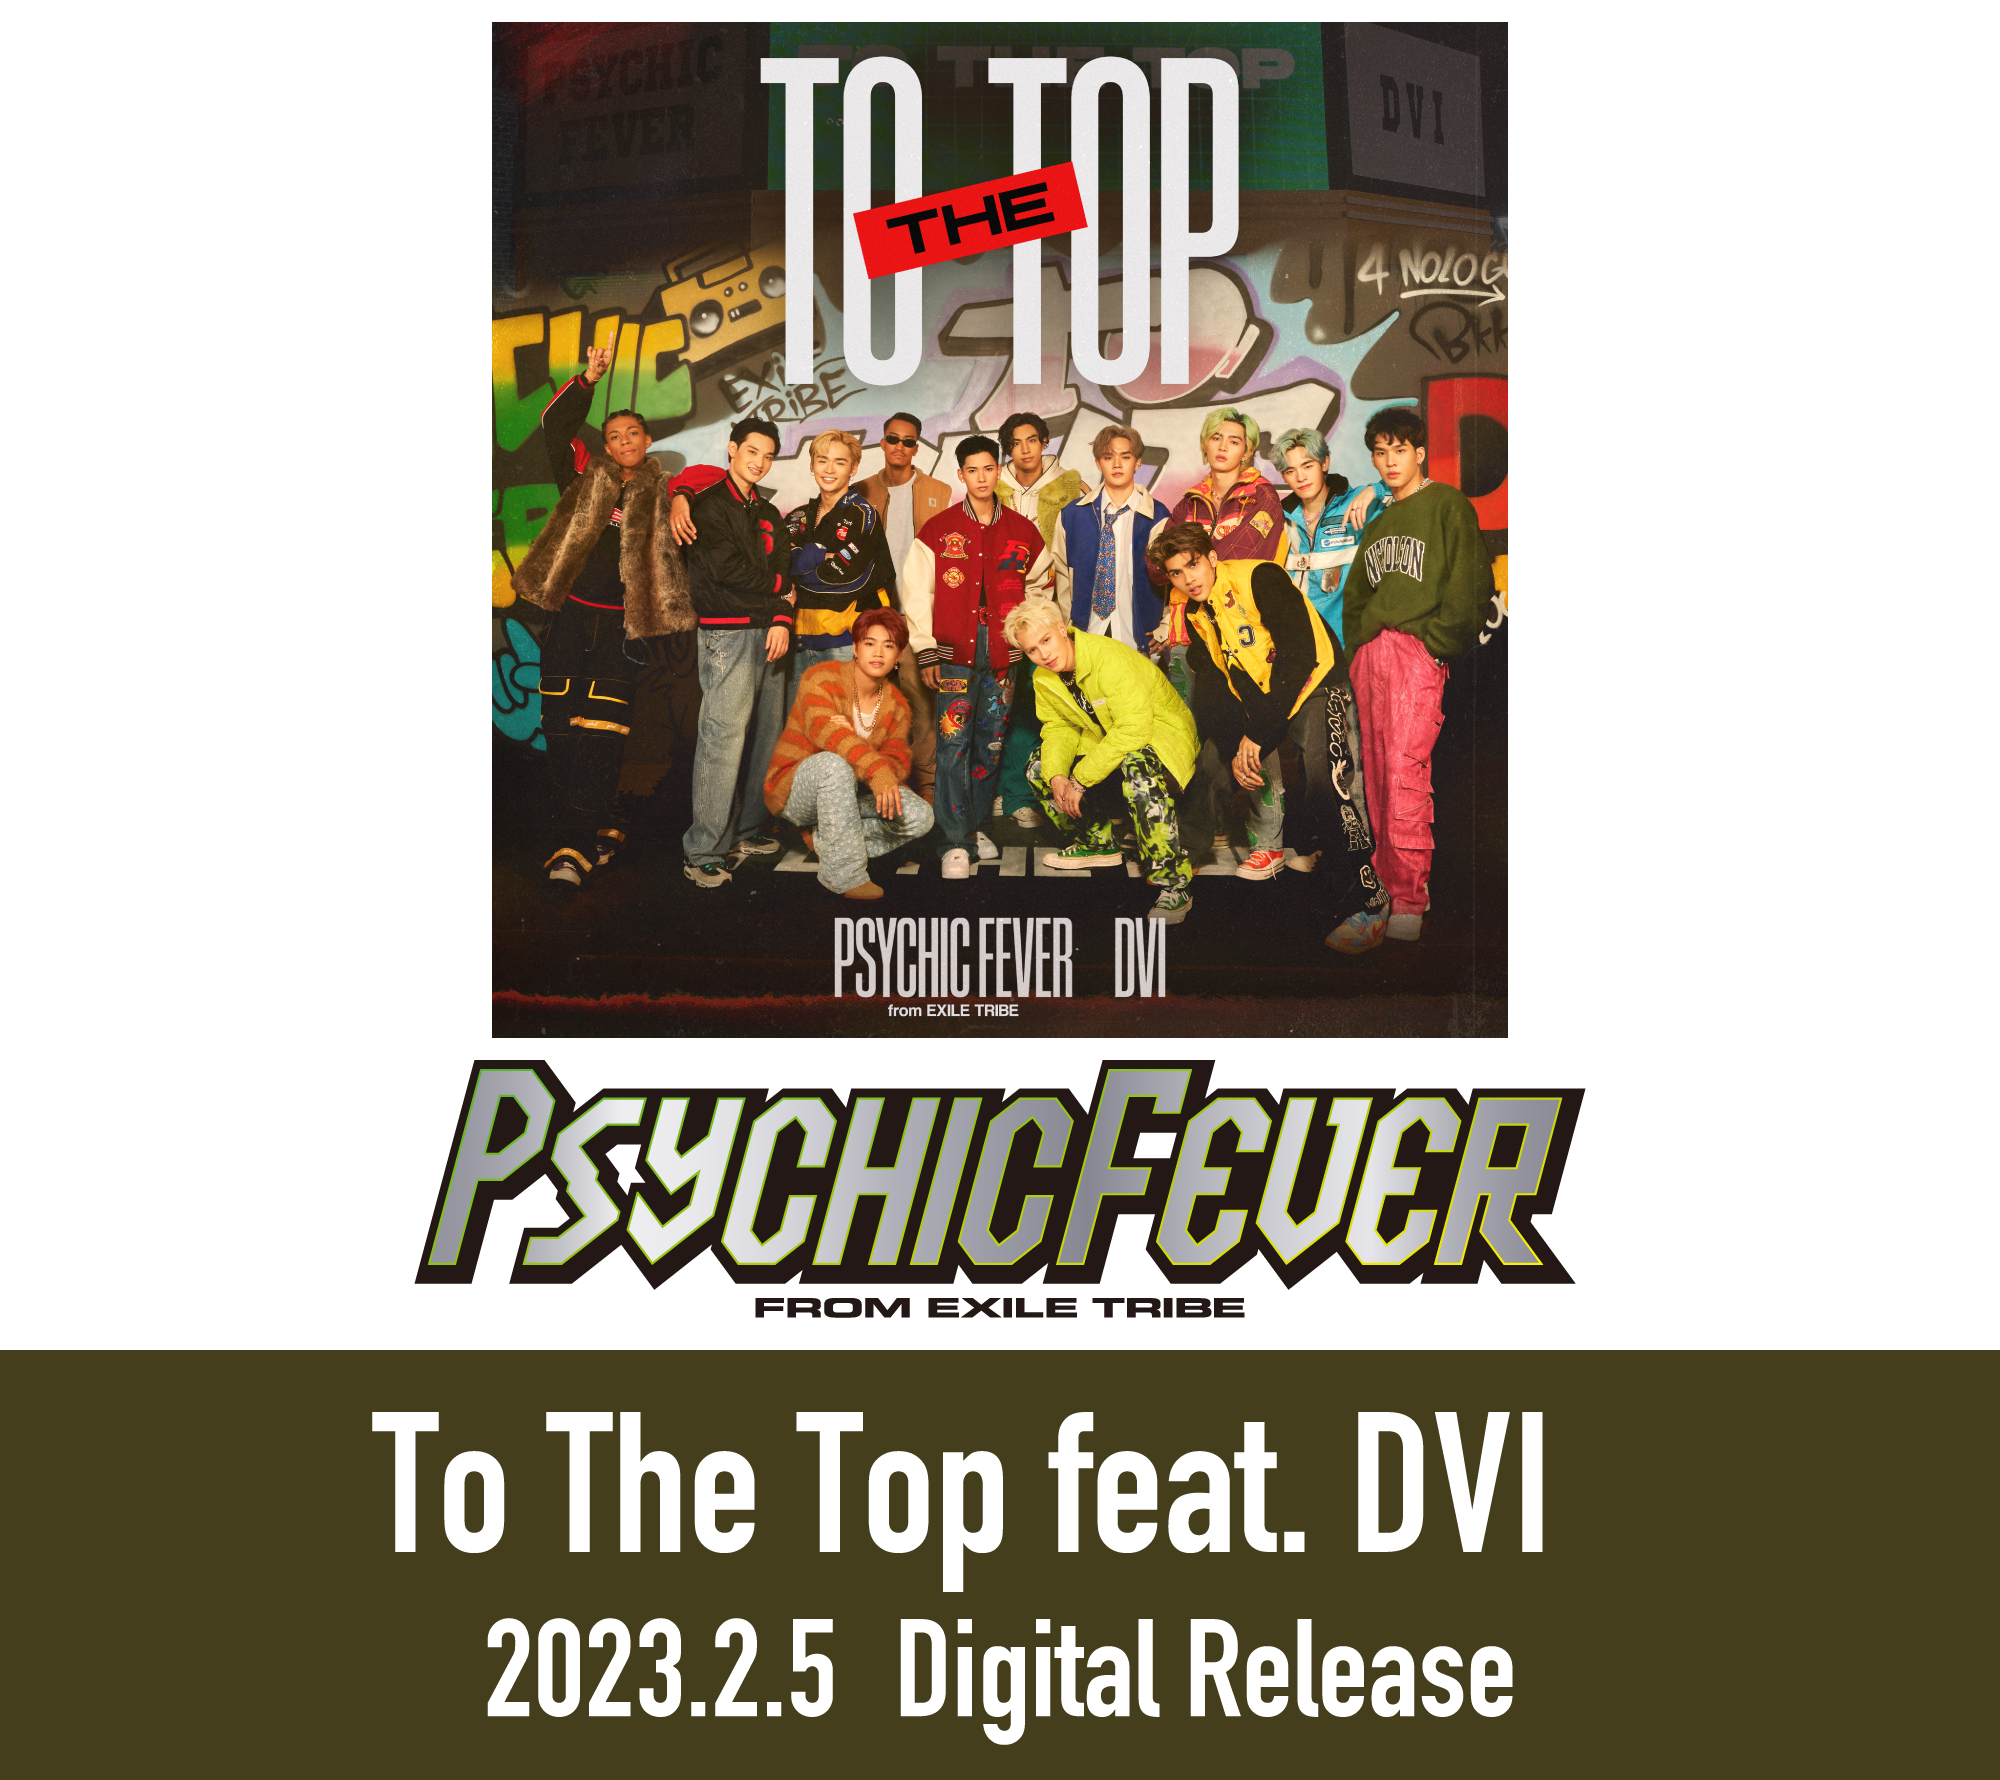 PSYCHIC FEVER from EXILE TRIBE 『To The Top feat. DVI』